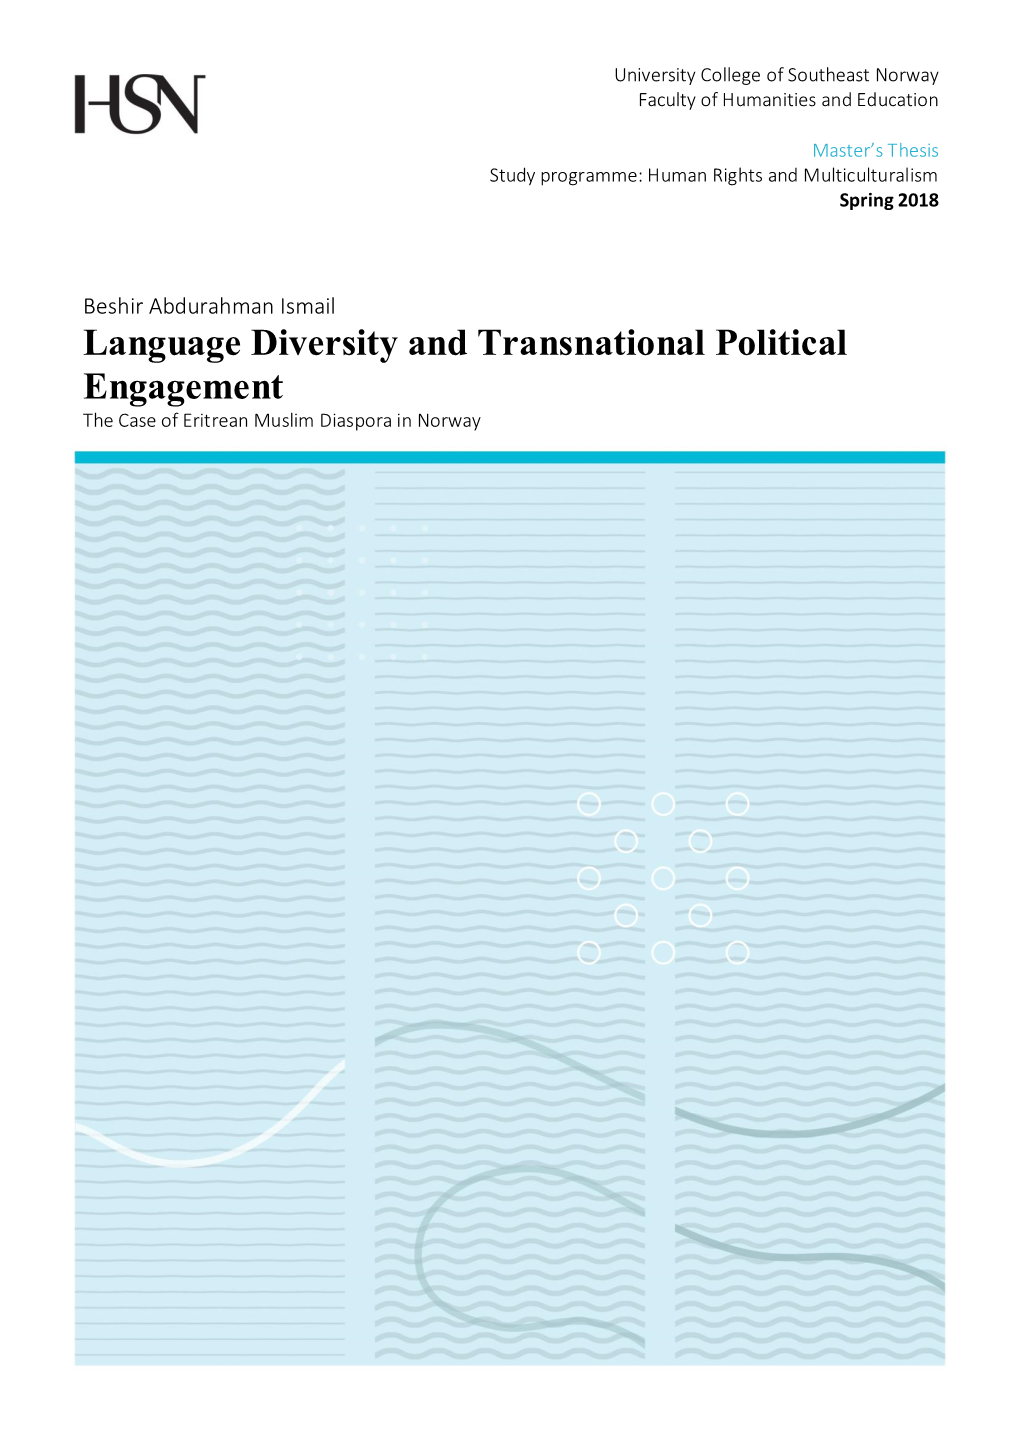 Language Diversity and Transnational Political Engagement the Case of Eritrean Muslim Diaspora in Norway